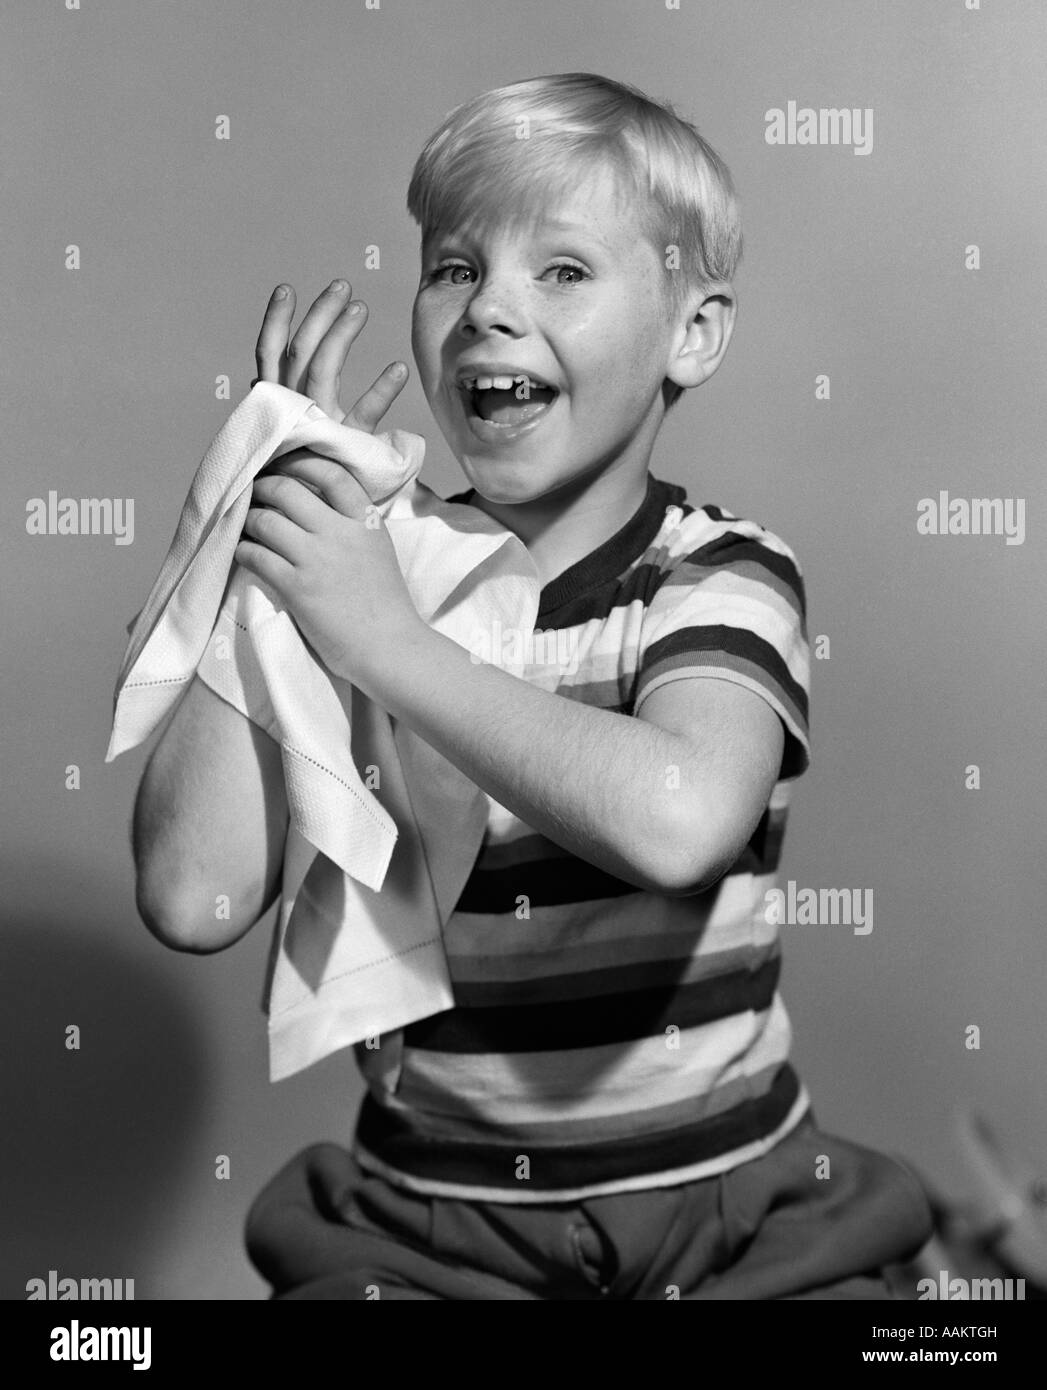 1950s SMILING BLOND BOY WASHING DRYING HANDS TOWEL Stock Photo